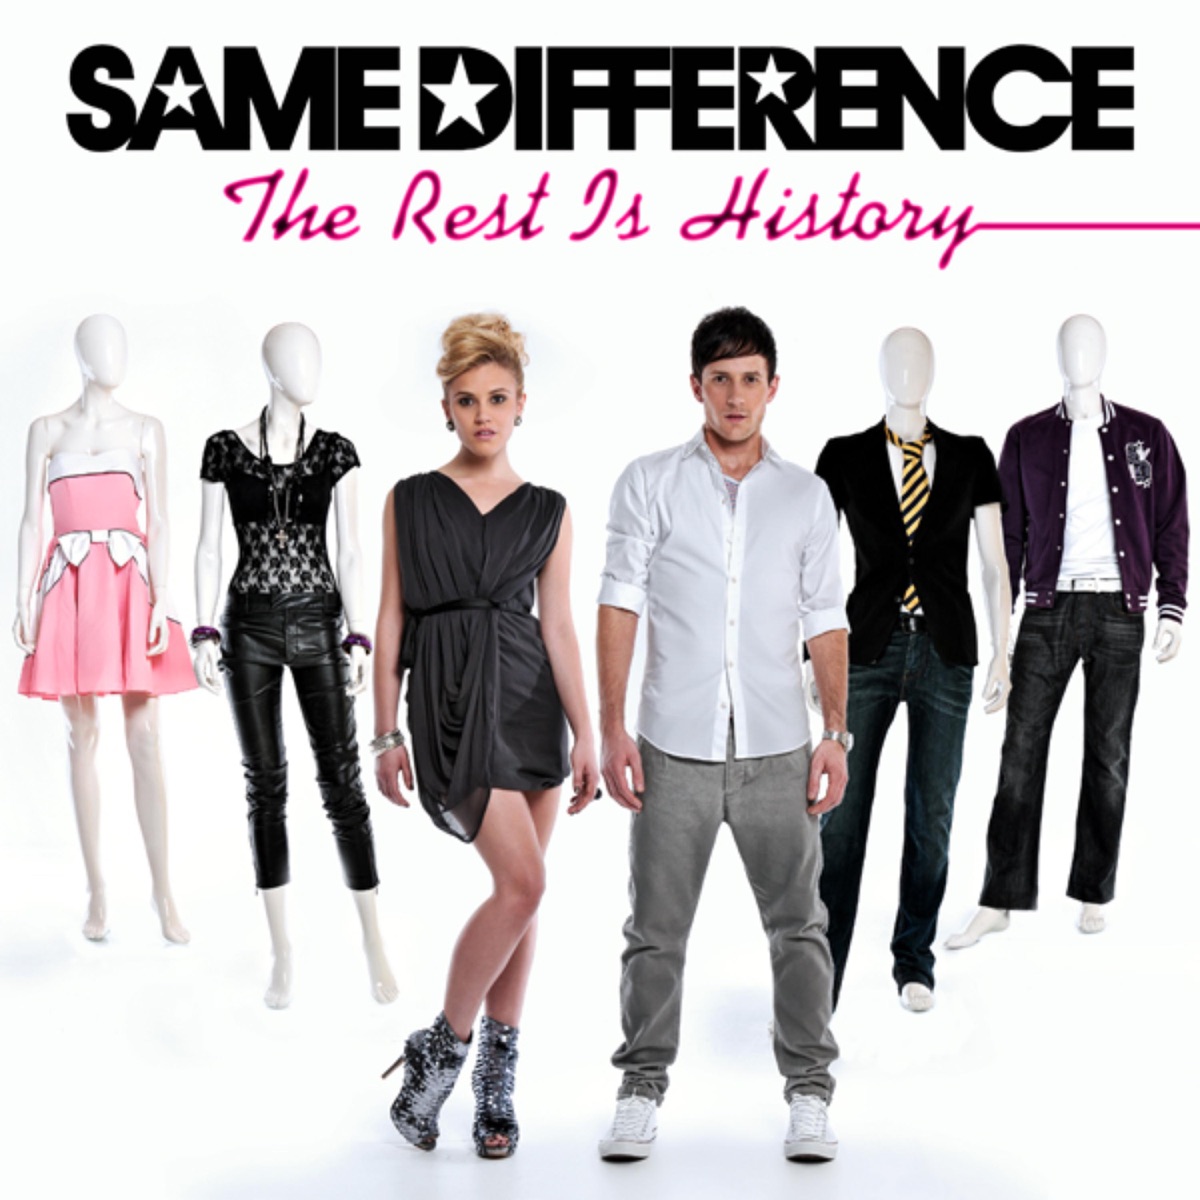 Same Difference The Rest Is History cover artwork